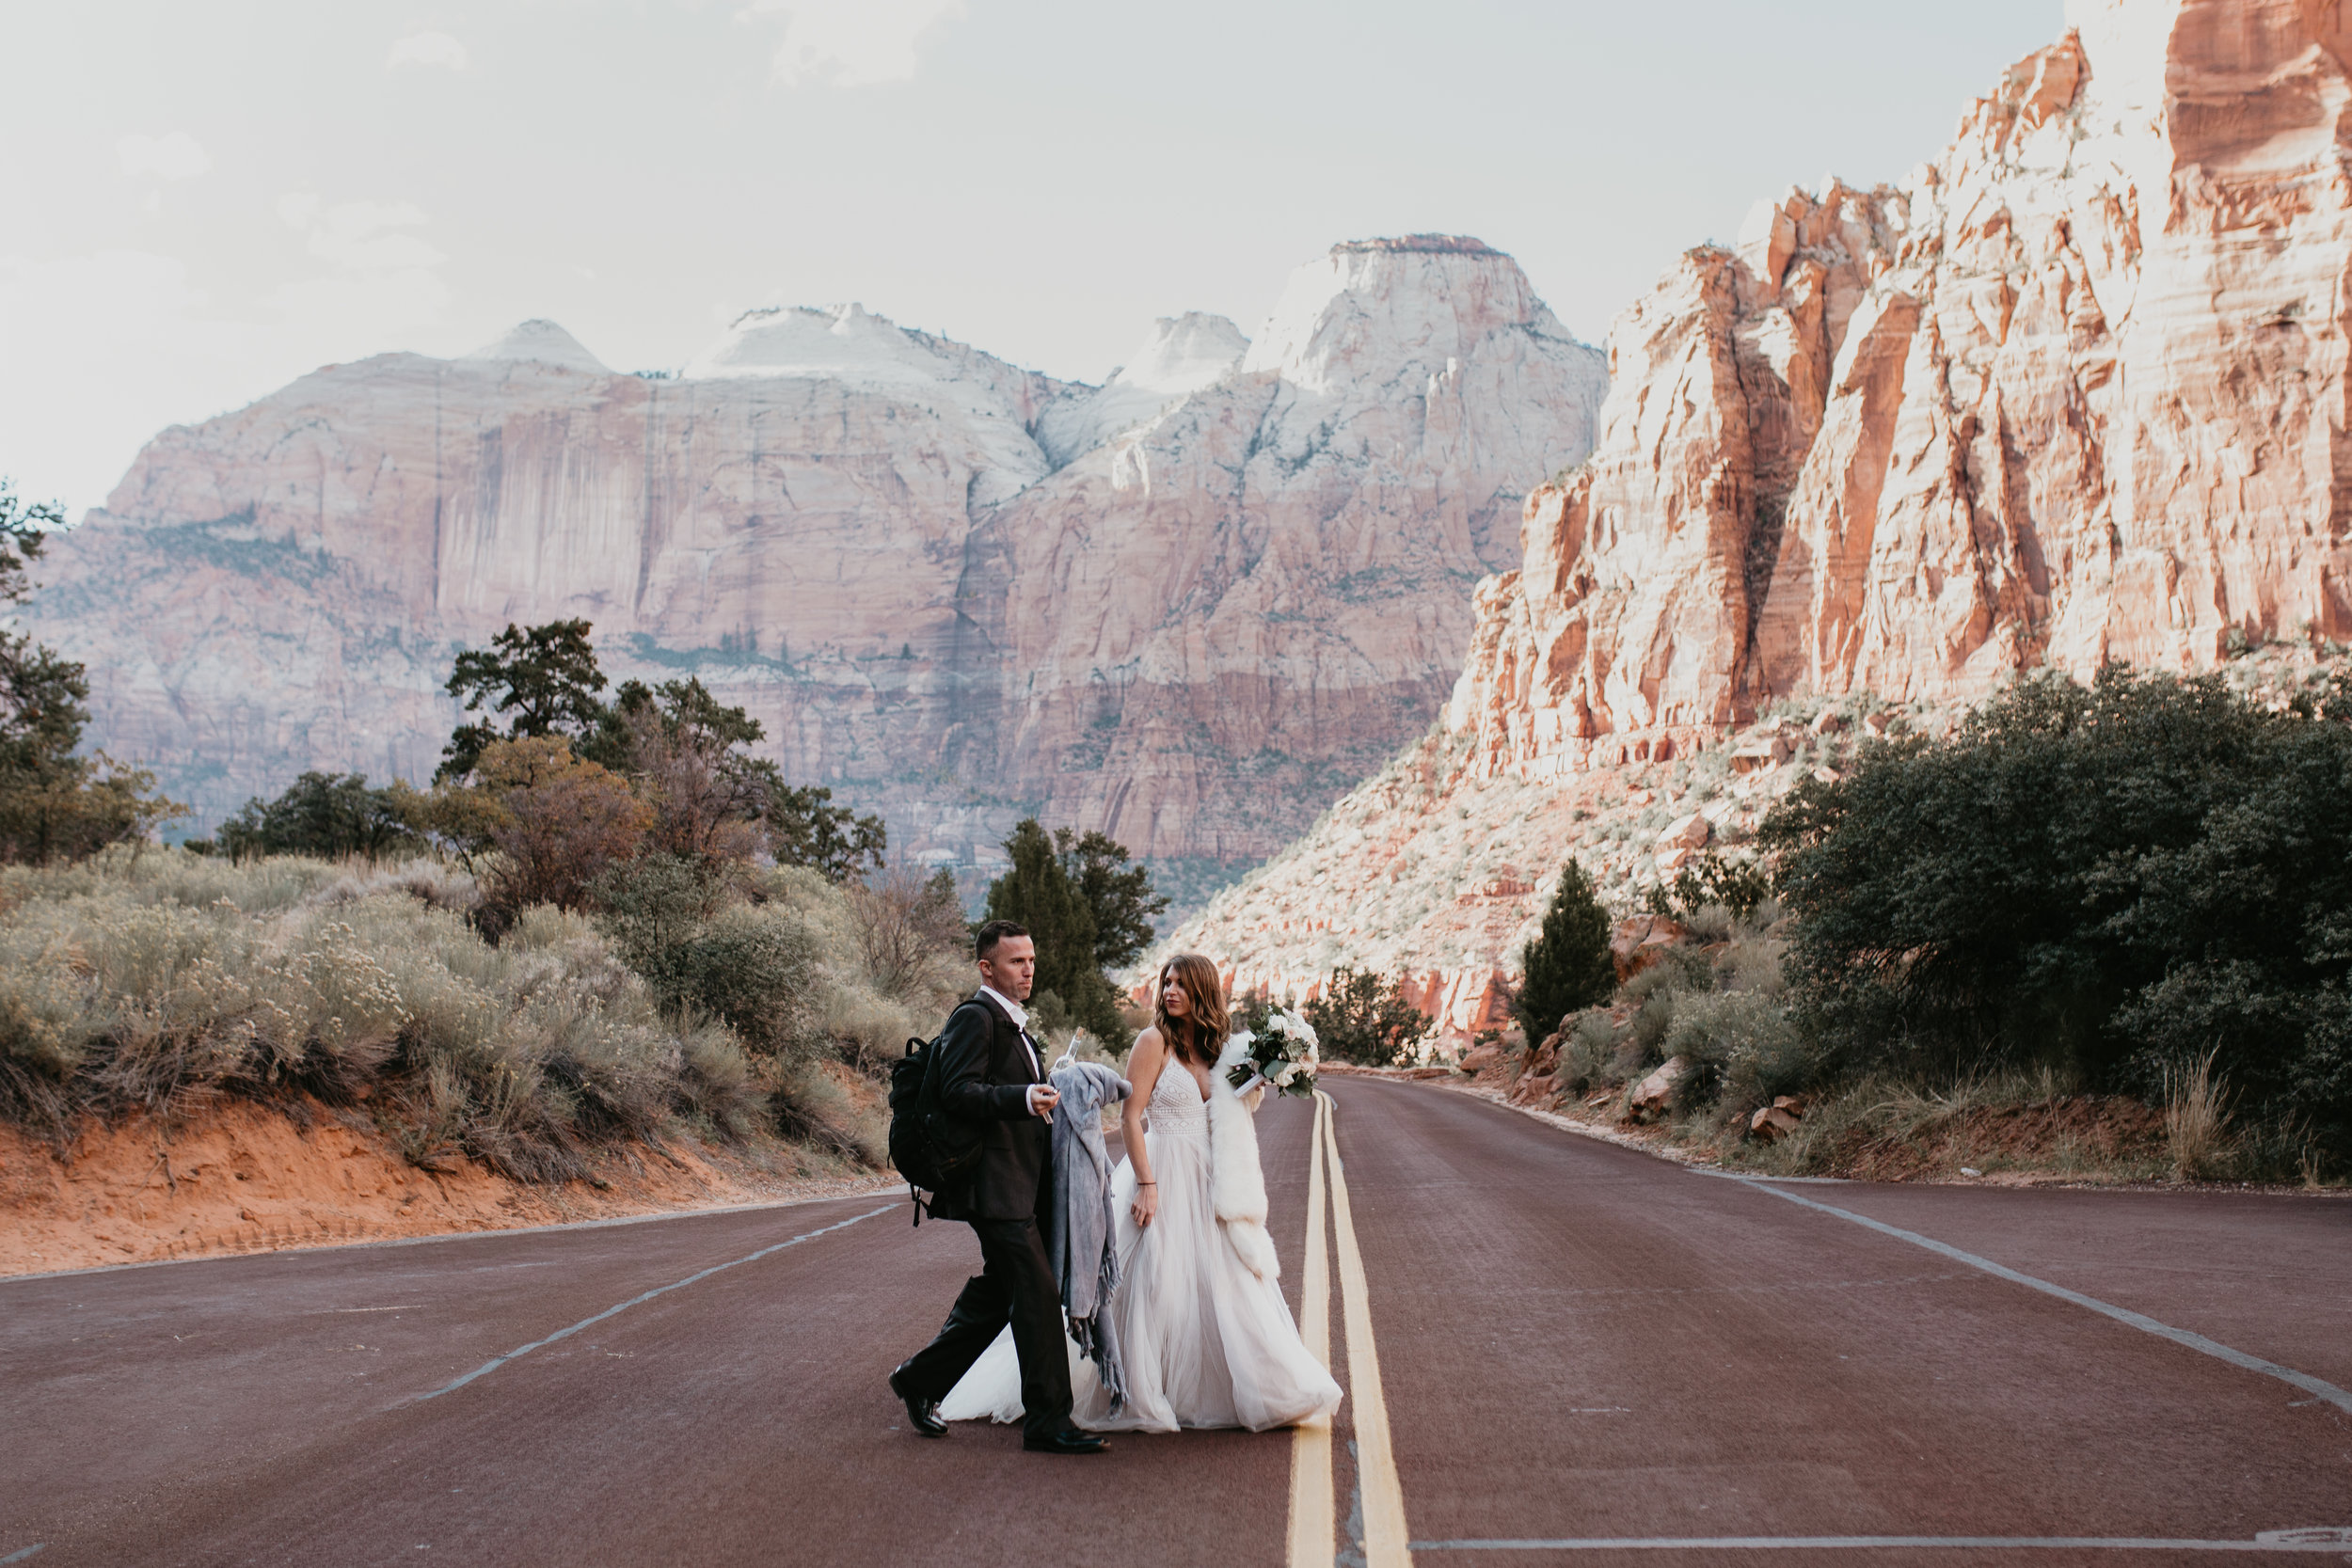 nicole-daacke-photography-zion-national-park-elopement-photographer-canyon-overlook-trail-elope-hiking-adventure-wedding-photos-fall-utah-red-rock-canyon-stgeorge-eloping-photographer-23.jpg